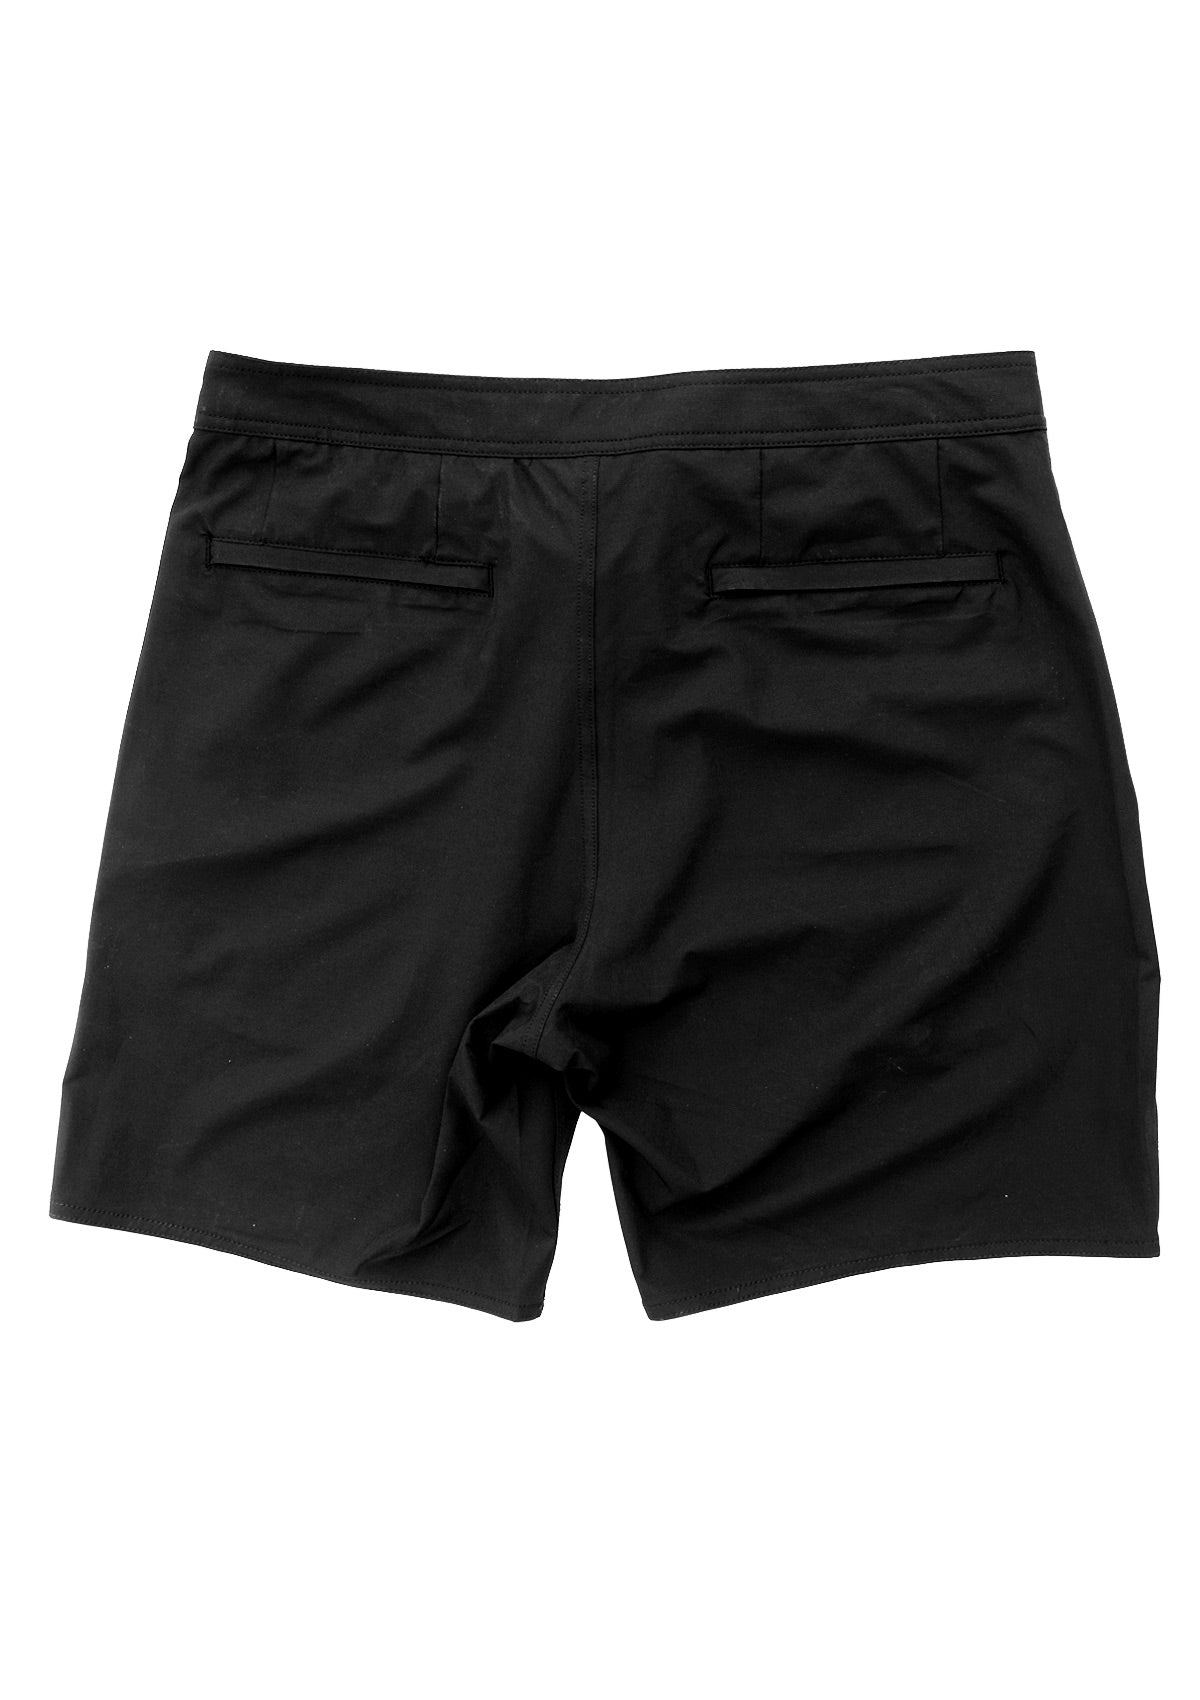 needessentials all rounder mens surfing boardshorts non branded black